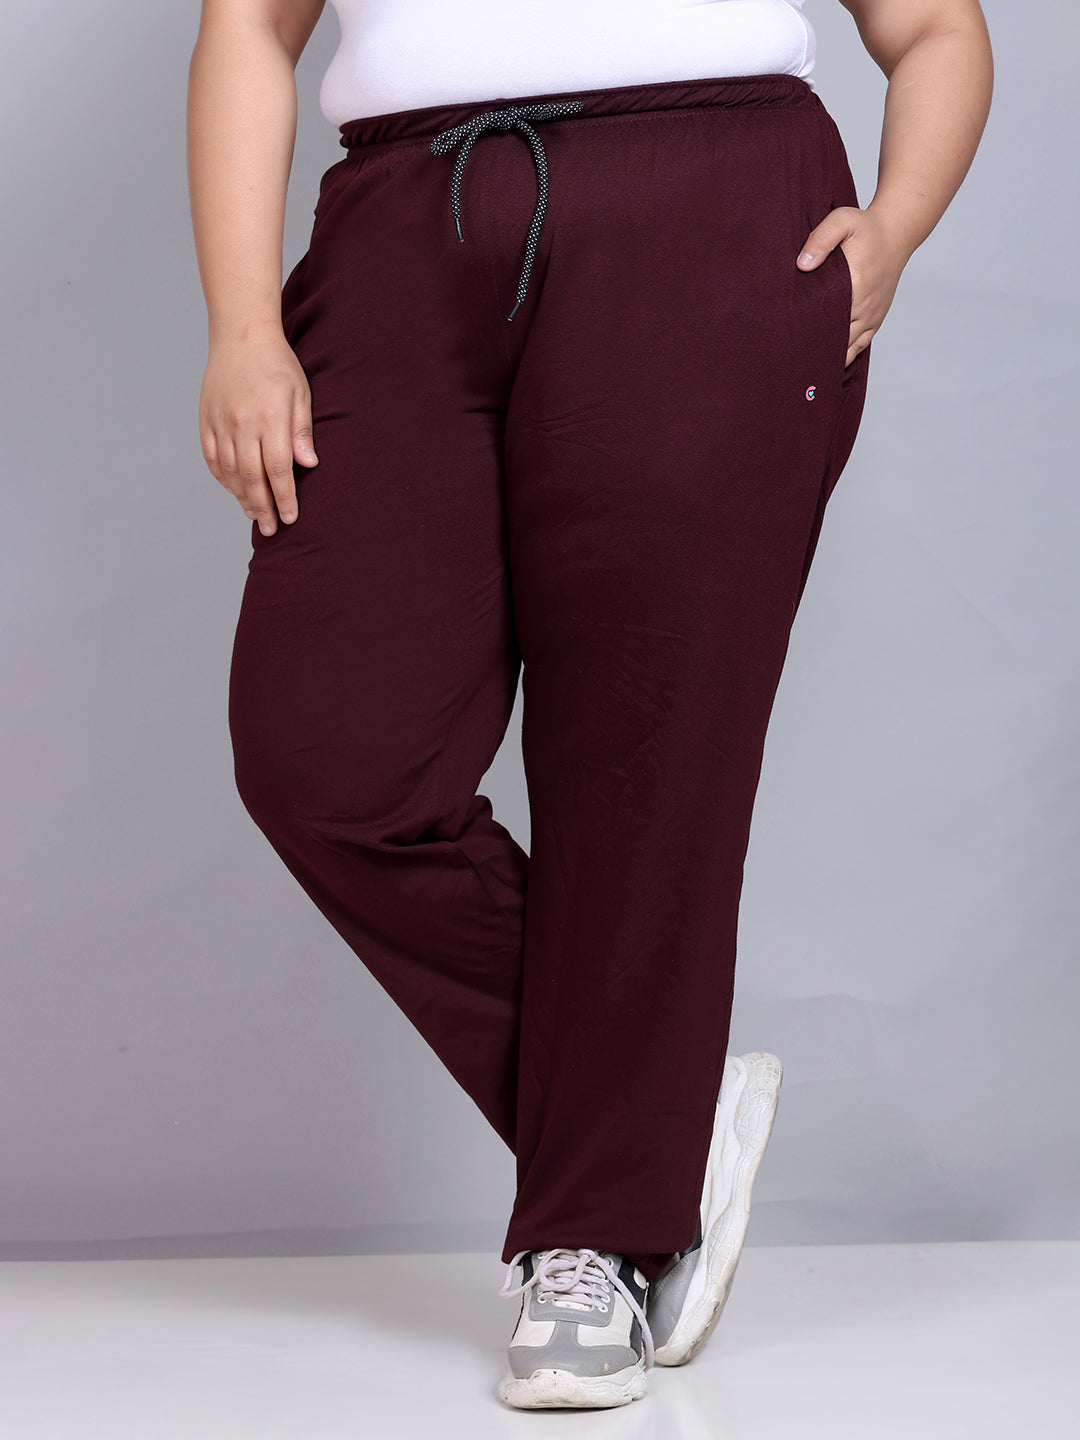 Comfy Wine Cotton Track Pants For Women At Best Prices